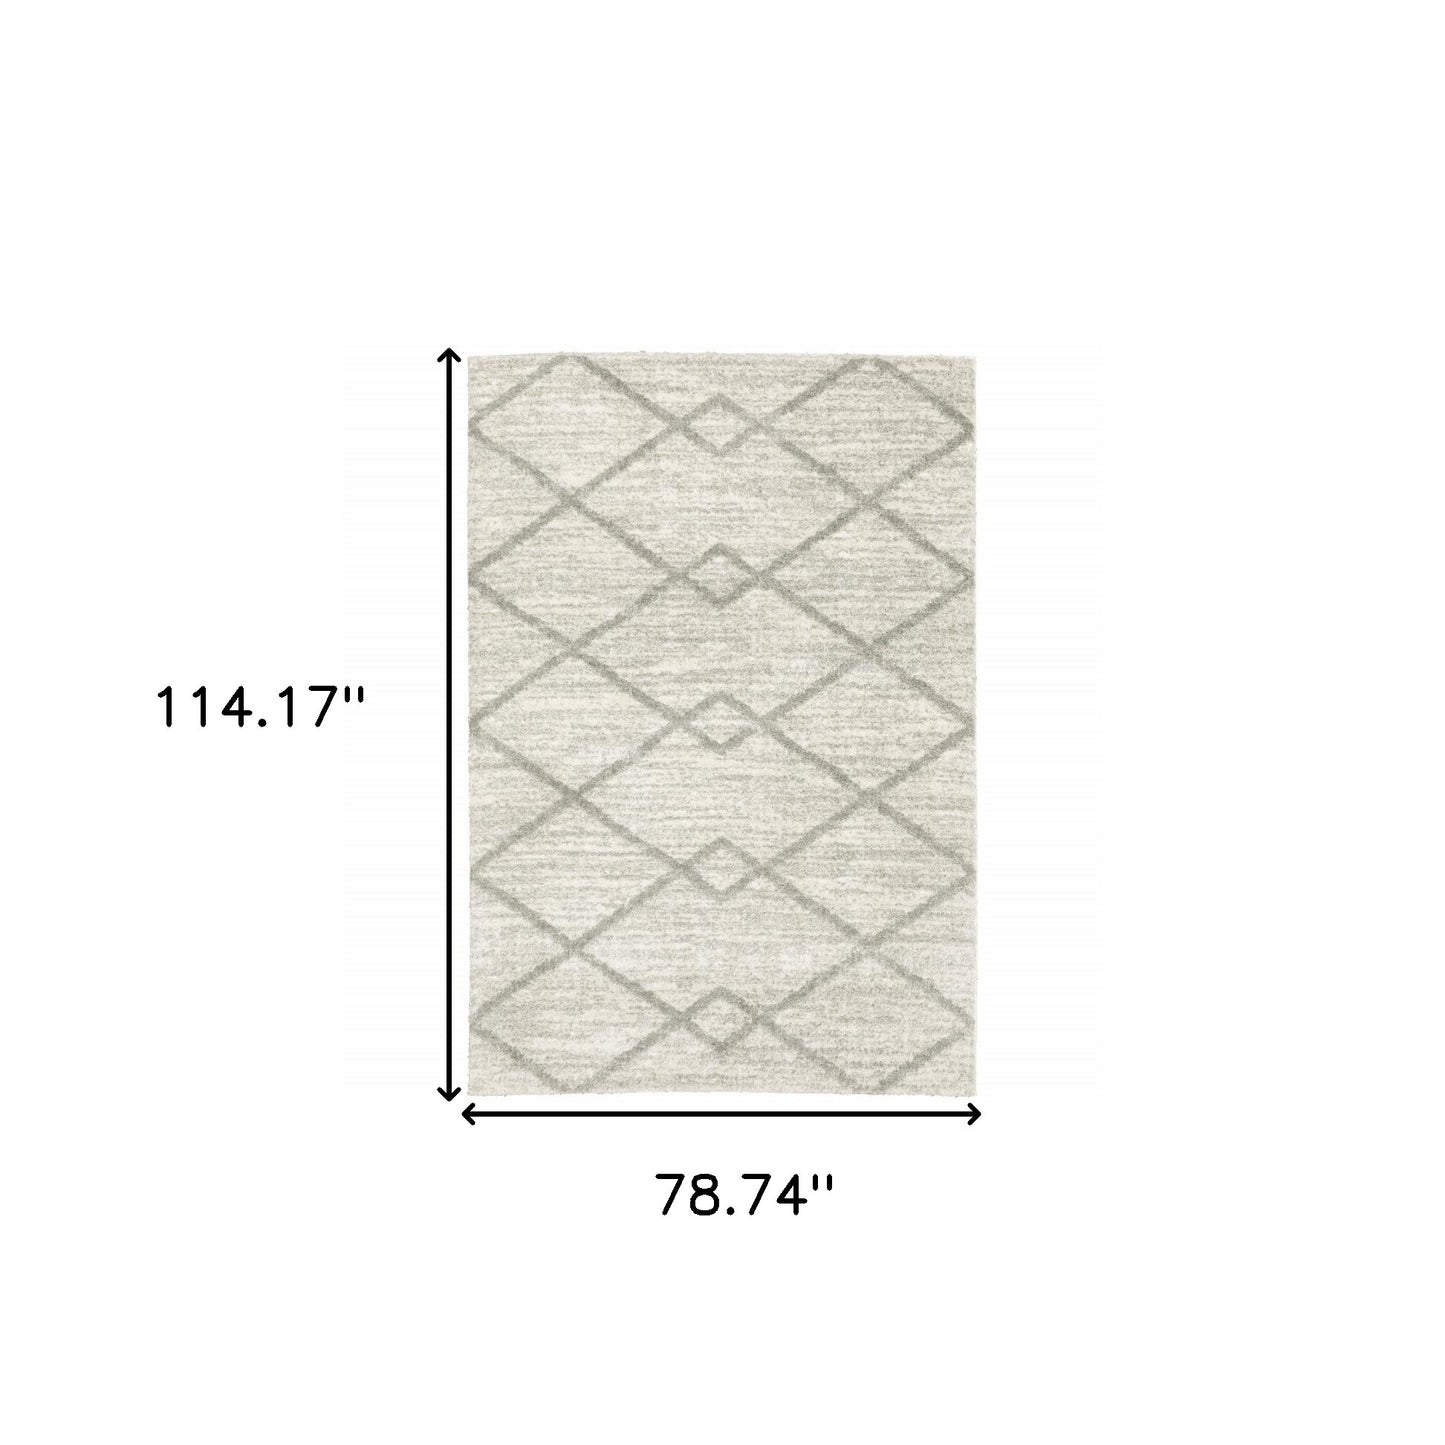 6' X 9' Ivory And Grey Geometric Shag Power Loom Stain Resistant Area Rug